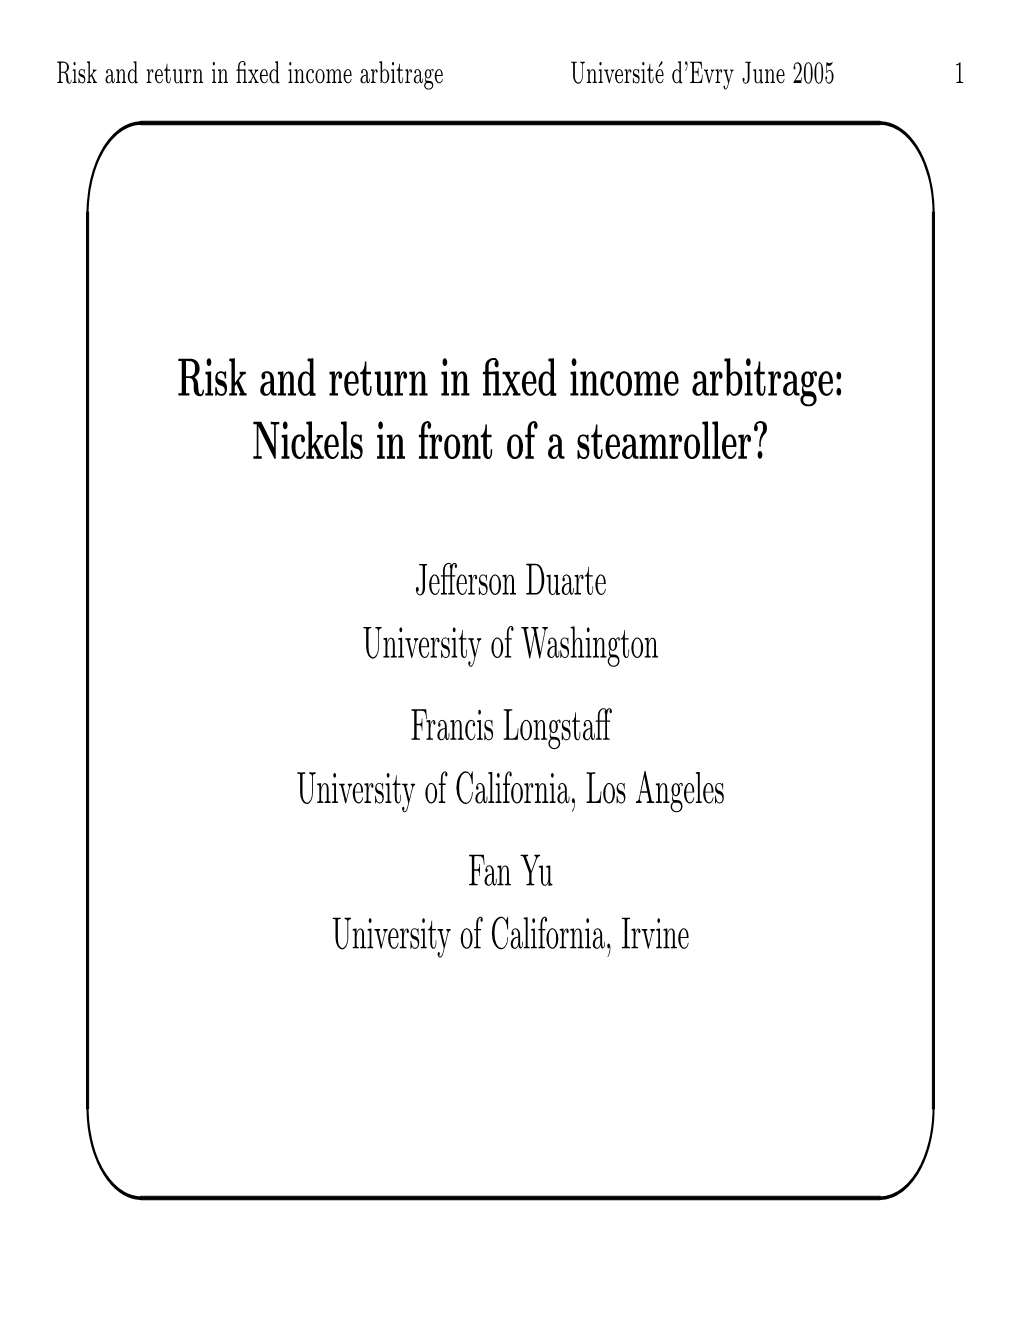 Risk and Return in Fixed Income Arbitrage